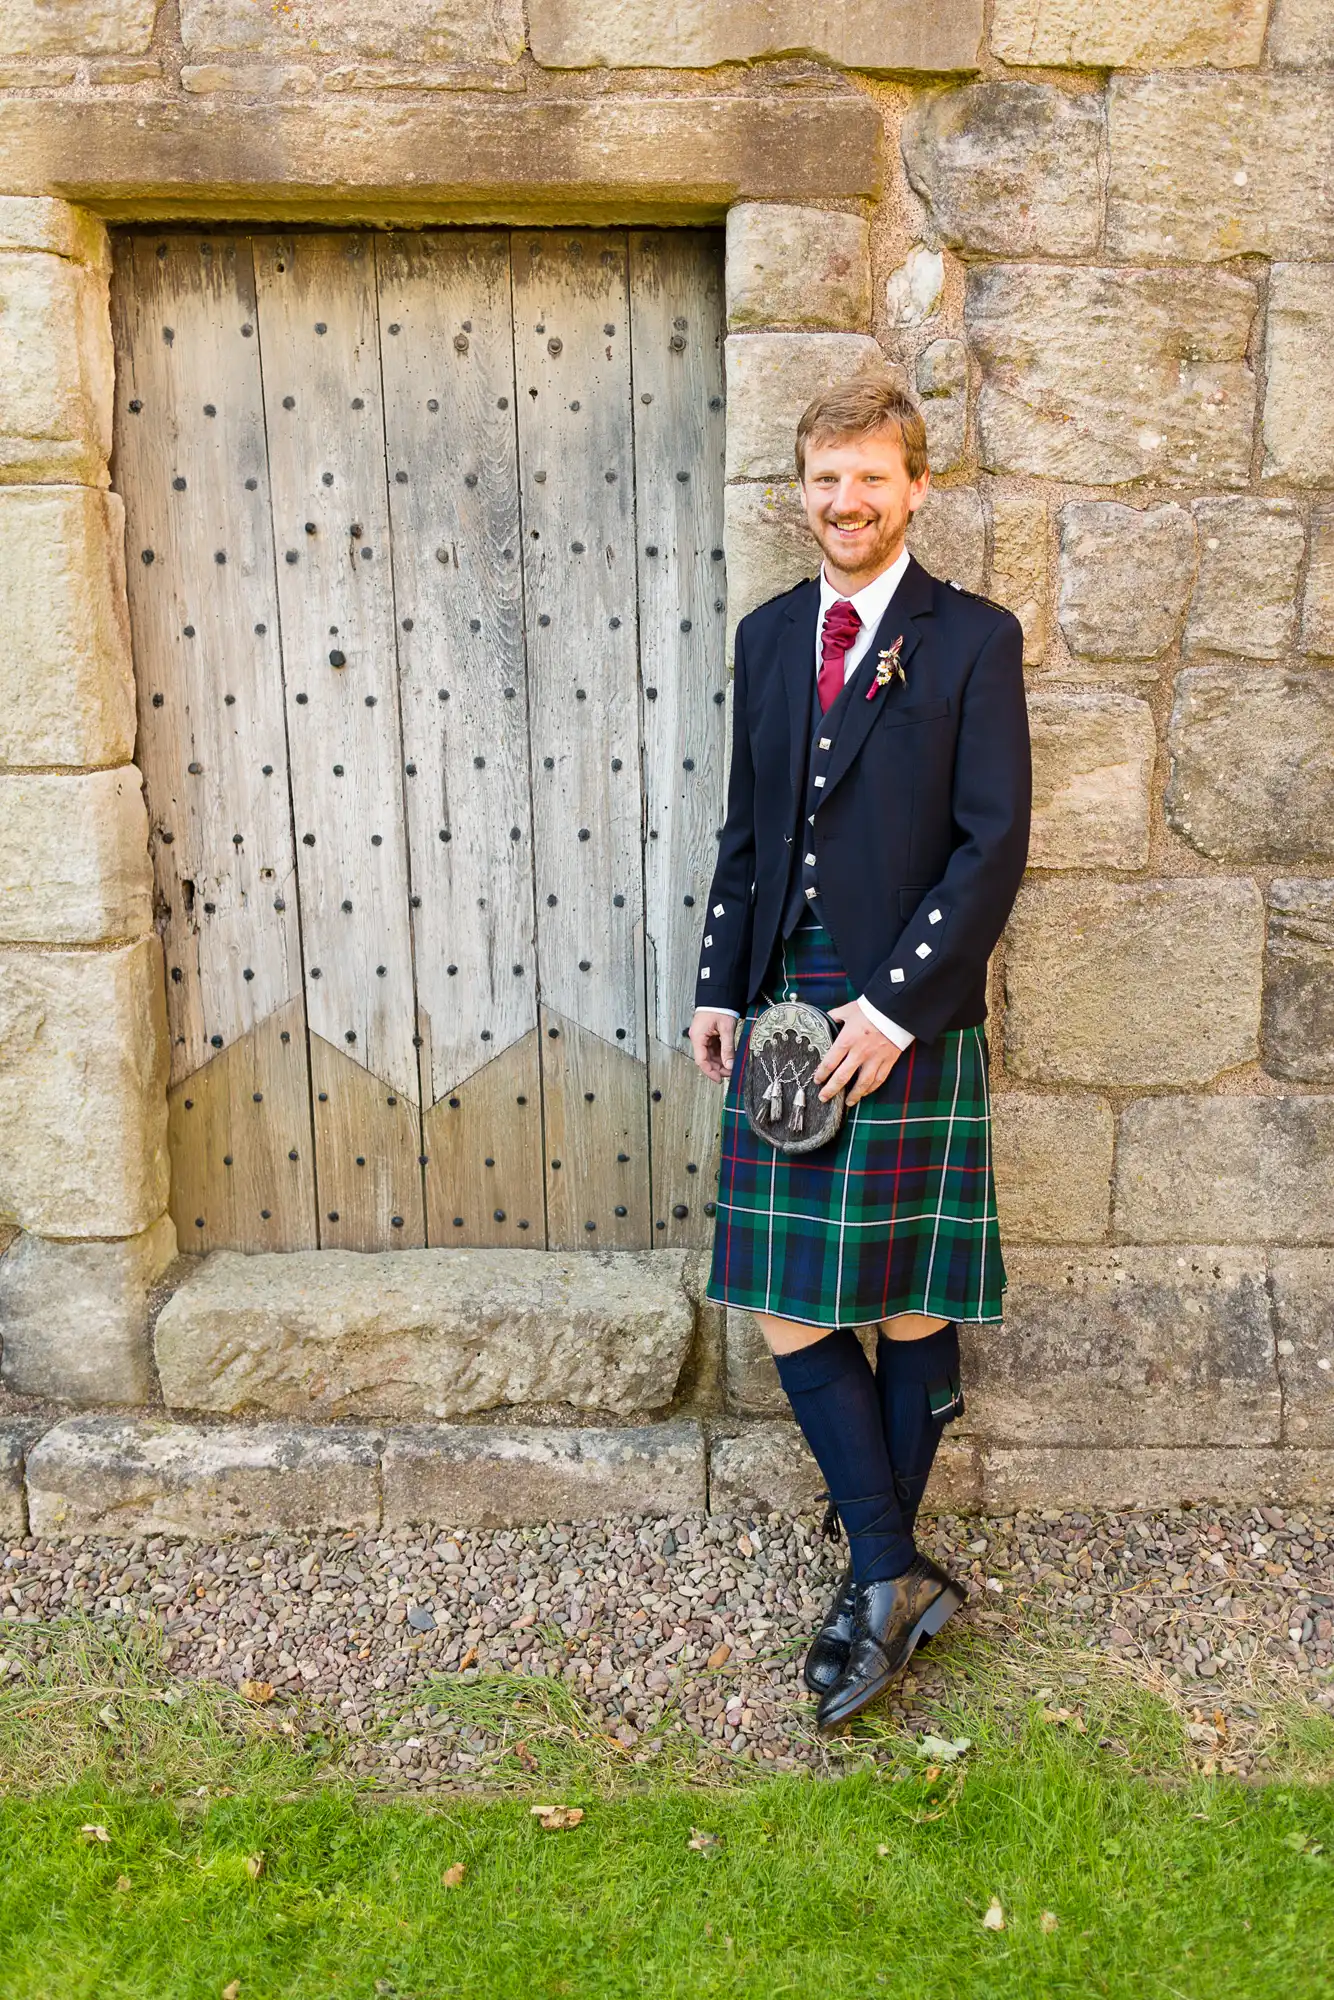 Man in traditional scottish attire, including kilt and sporran, standing beside an old wooden door, smiling.